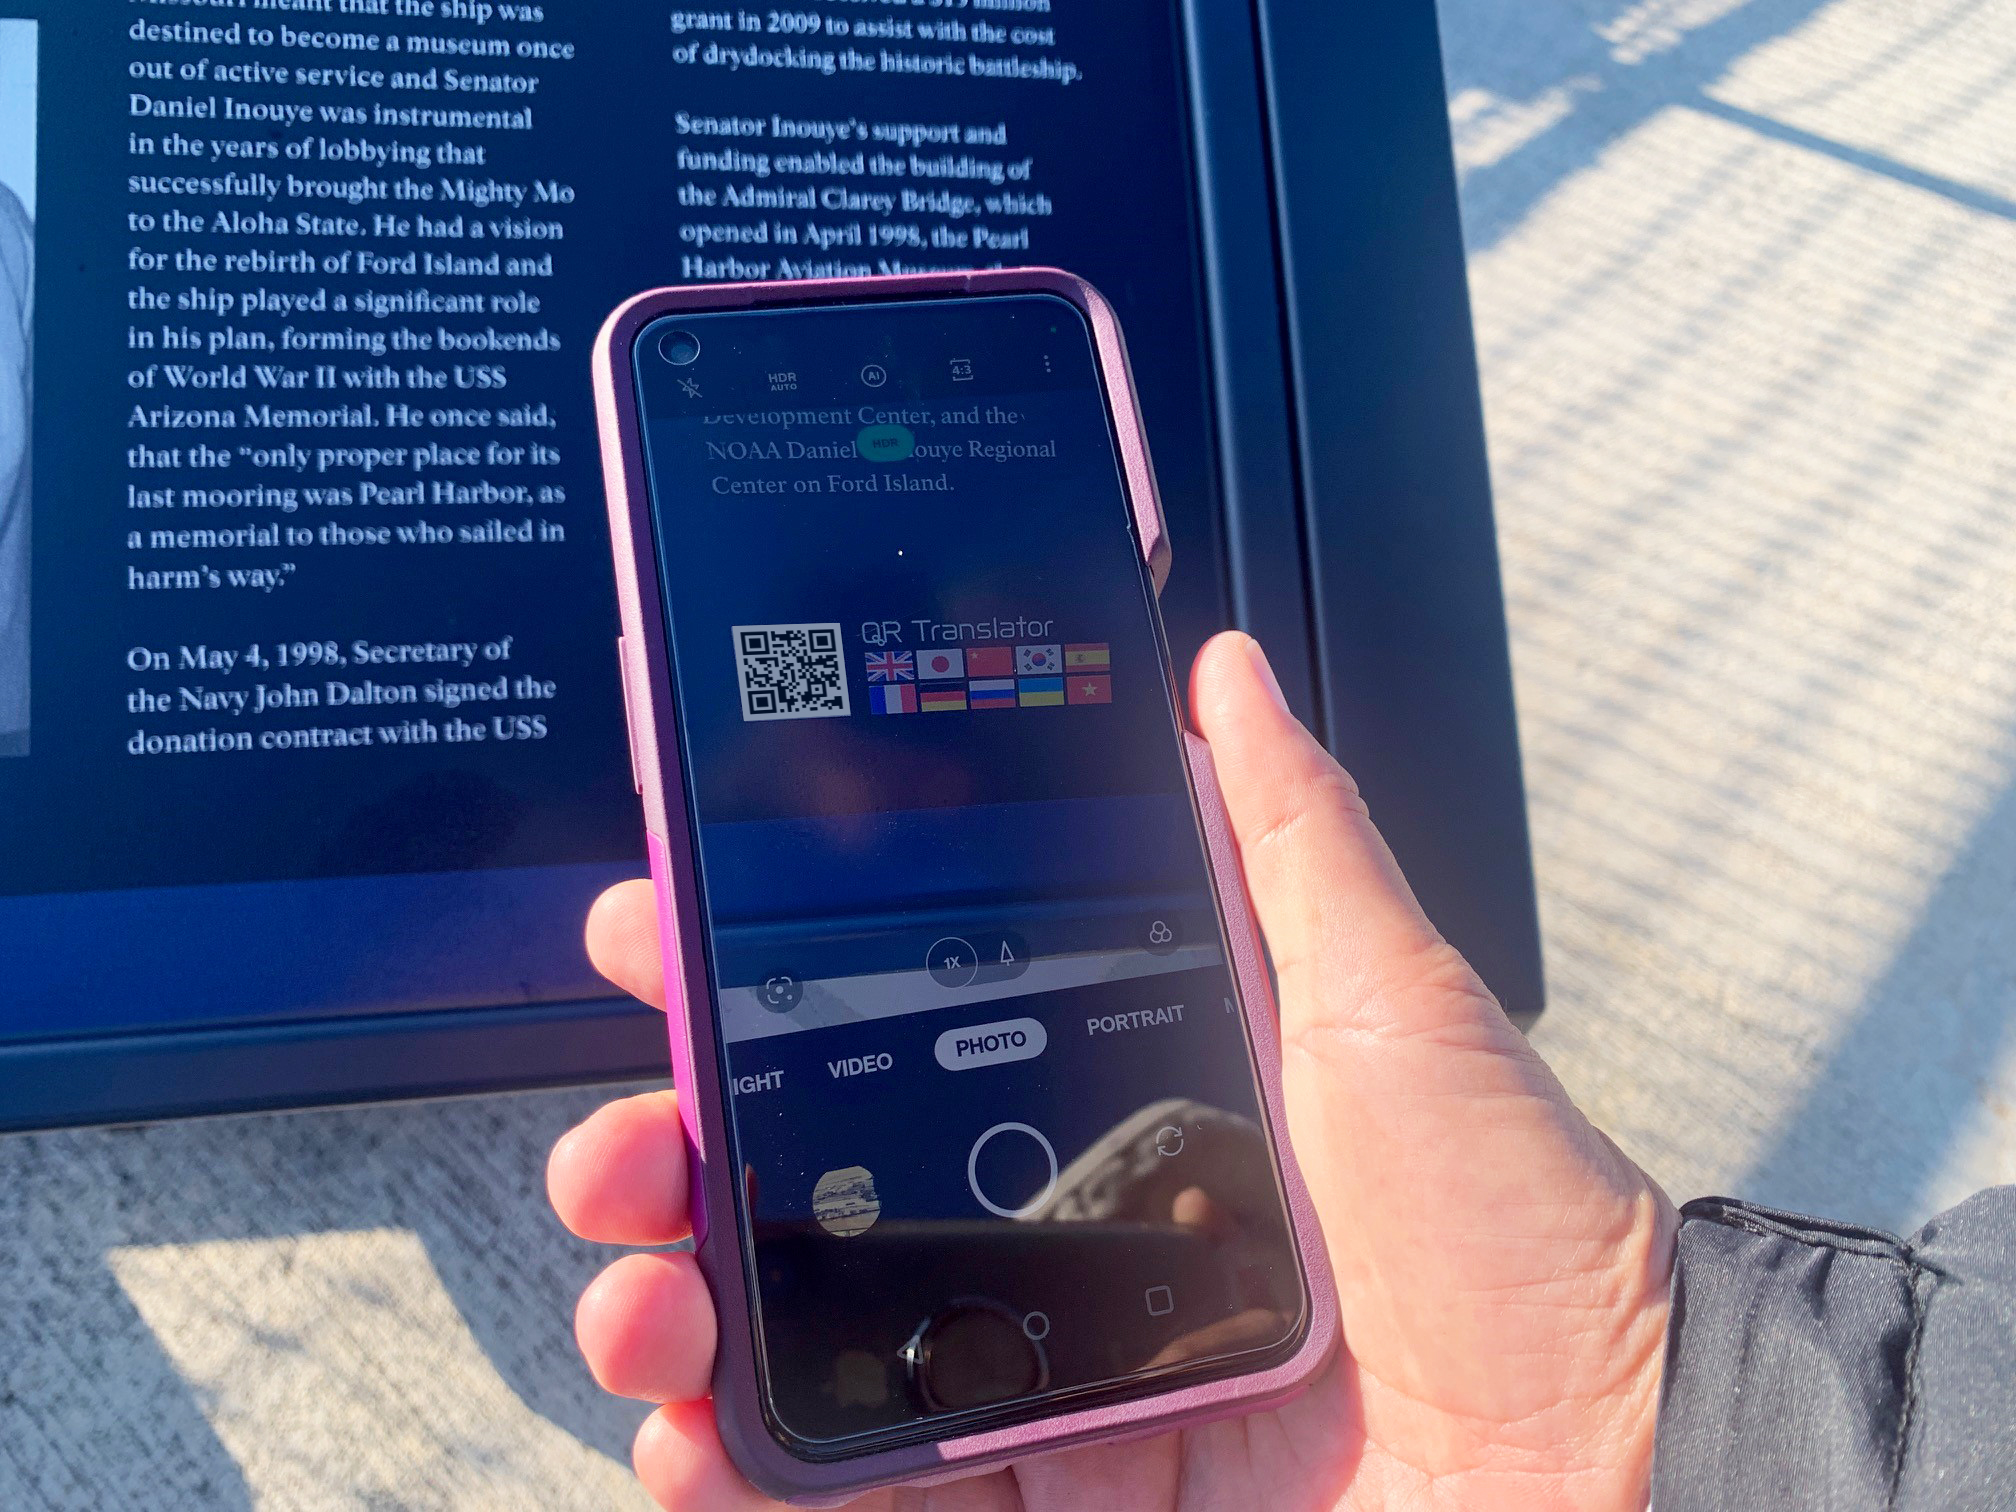 Scanning the QR code with a smartphone